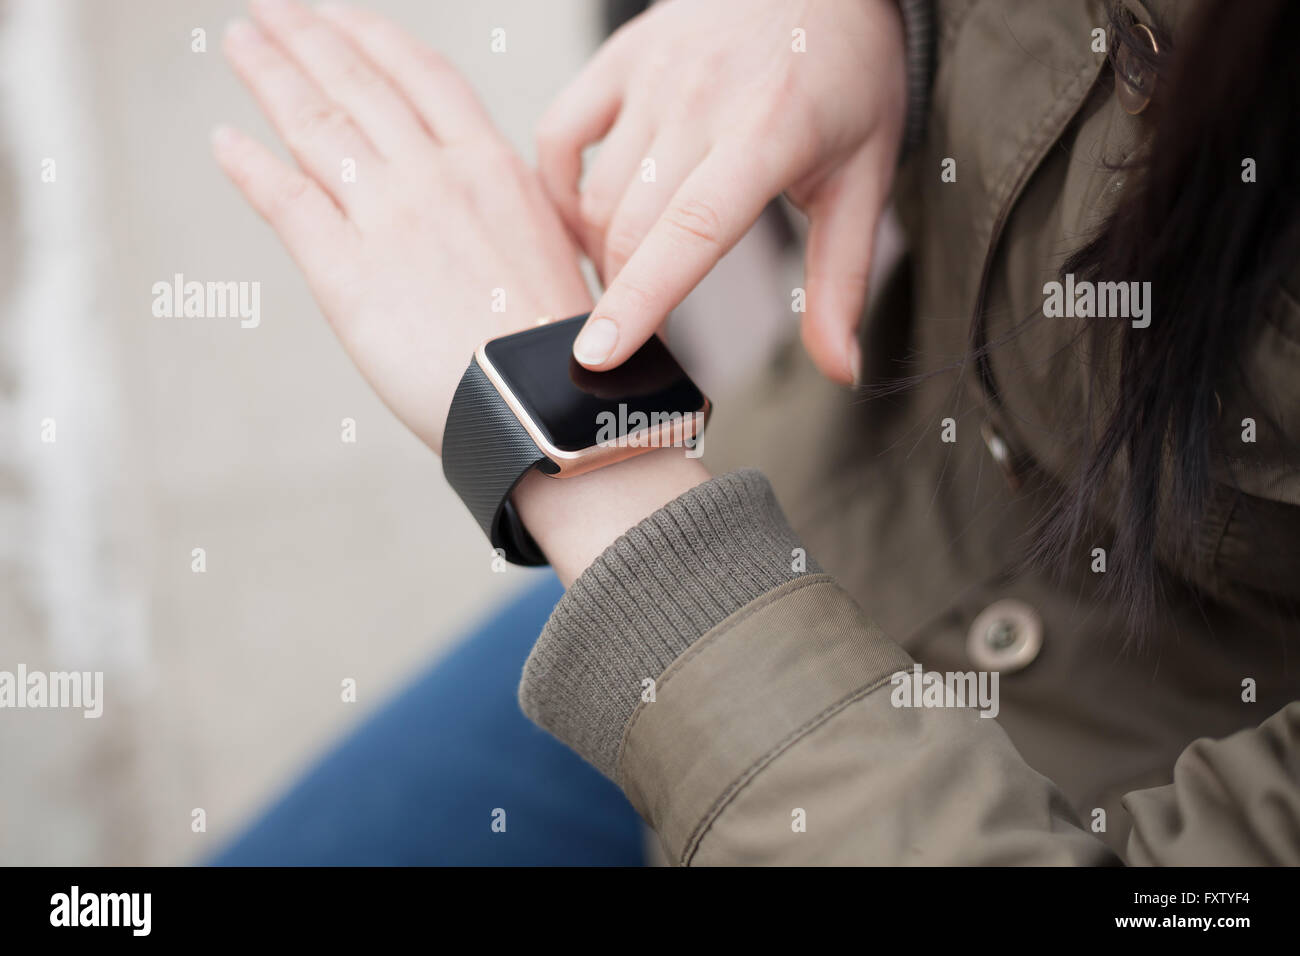 Hands of a girl using her trendy smart wrist watch. This new gadget lets you always stay connected to internet and social media networks from anywhere you want. Stock Photo